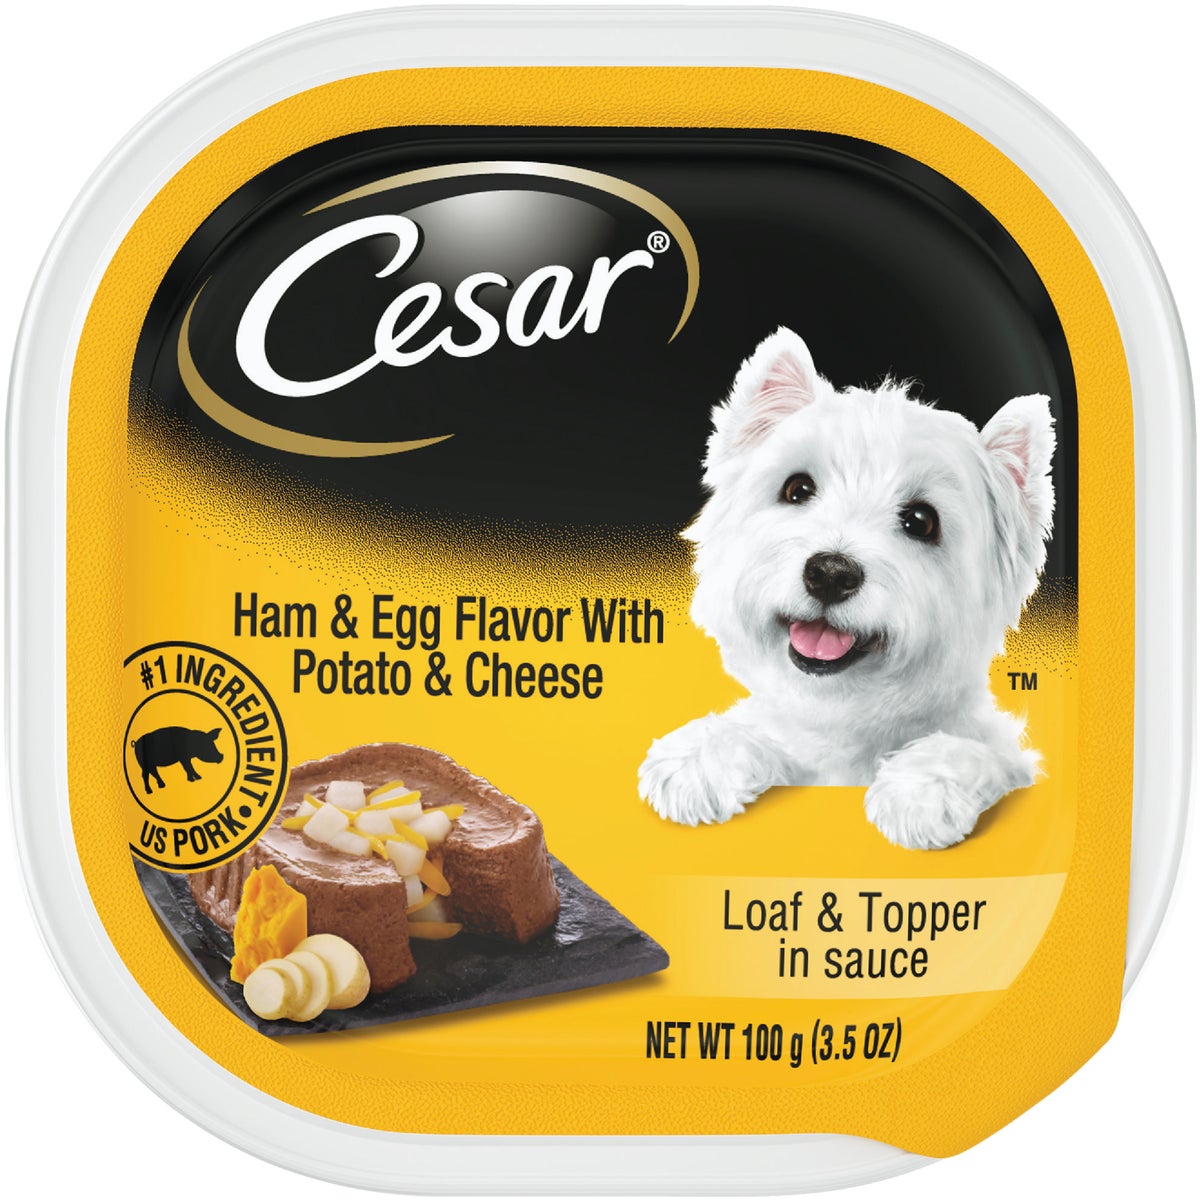 Cesar Loaf & Topper Ham & Egg with Potato & Cheese Adult Wet Dog Food, 3.5 Oz.